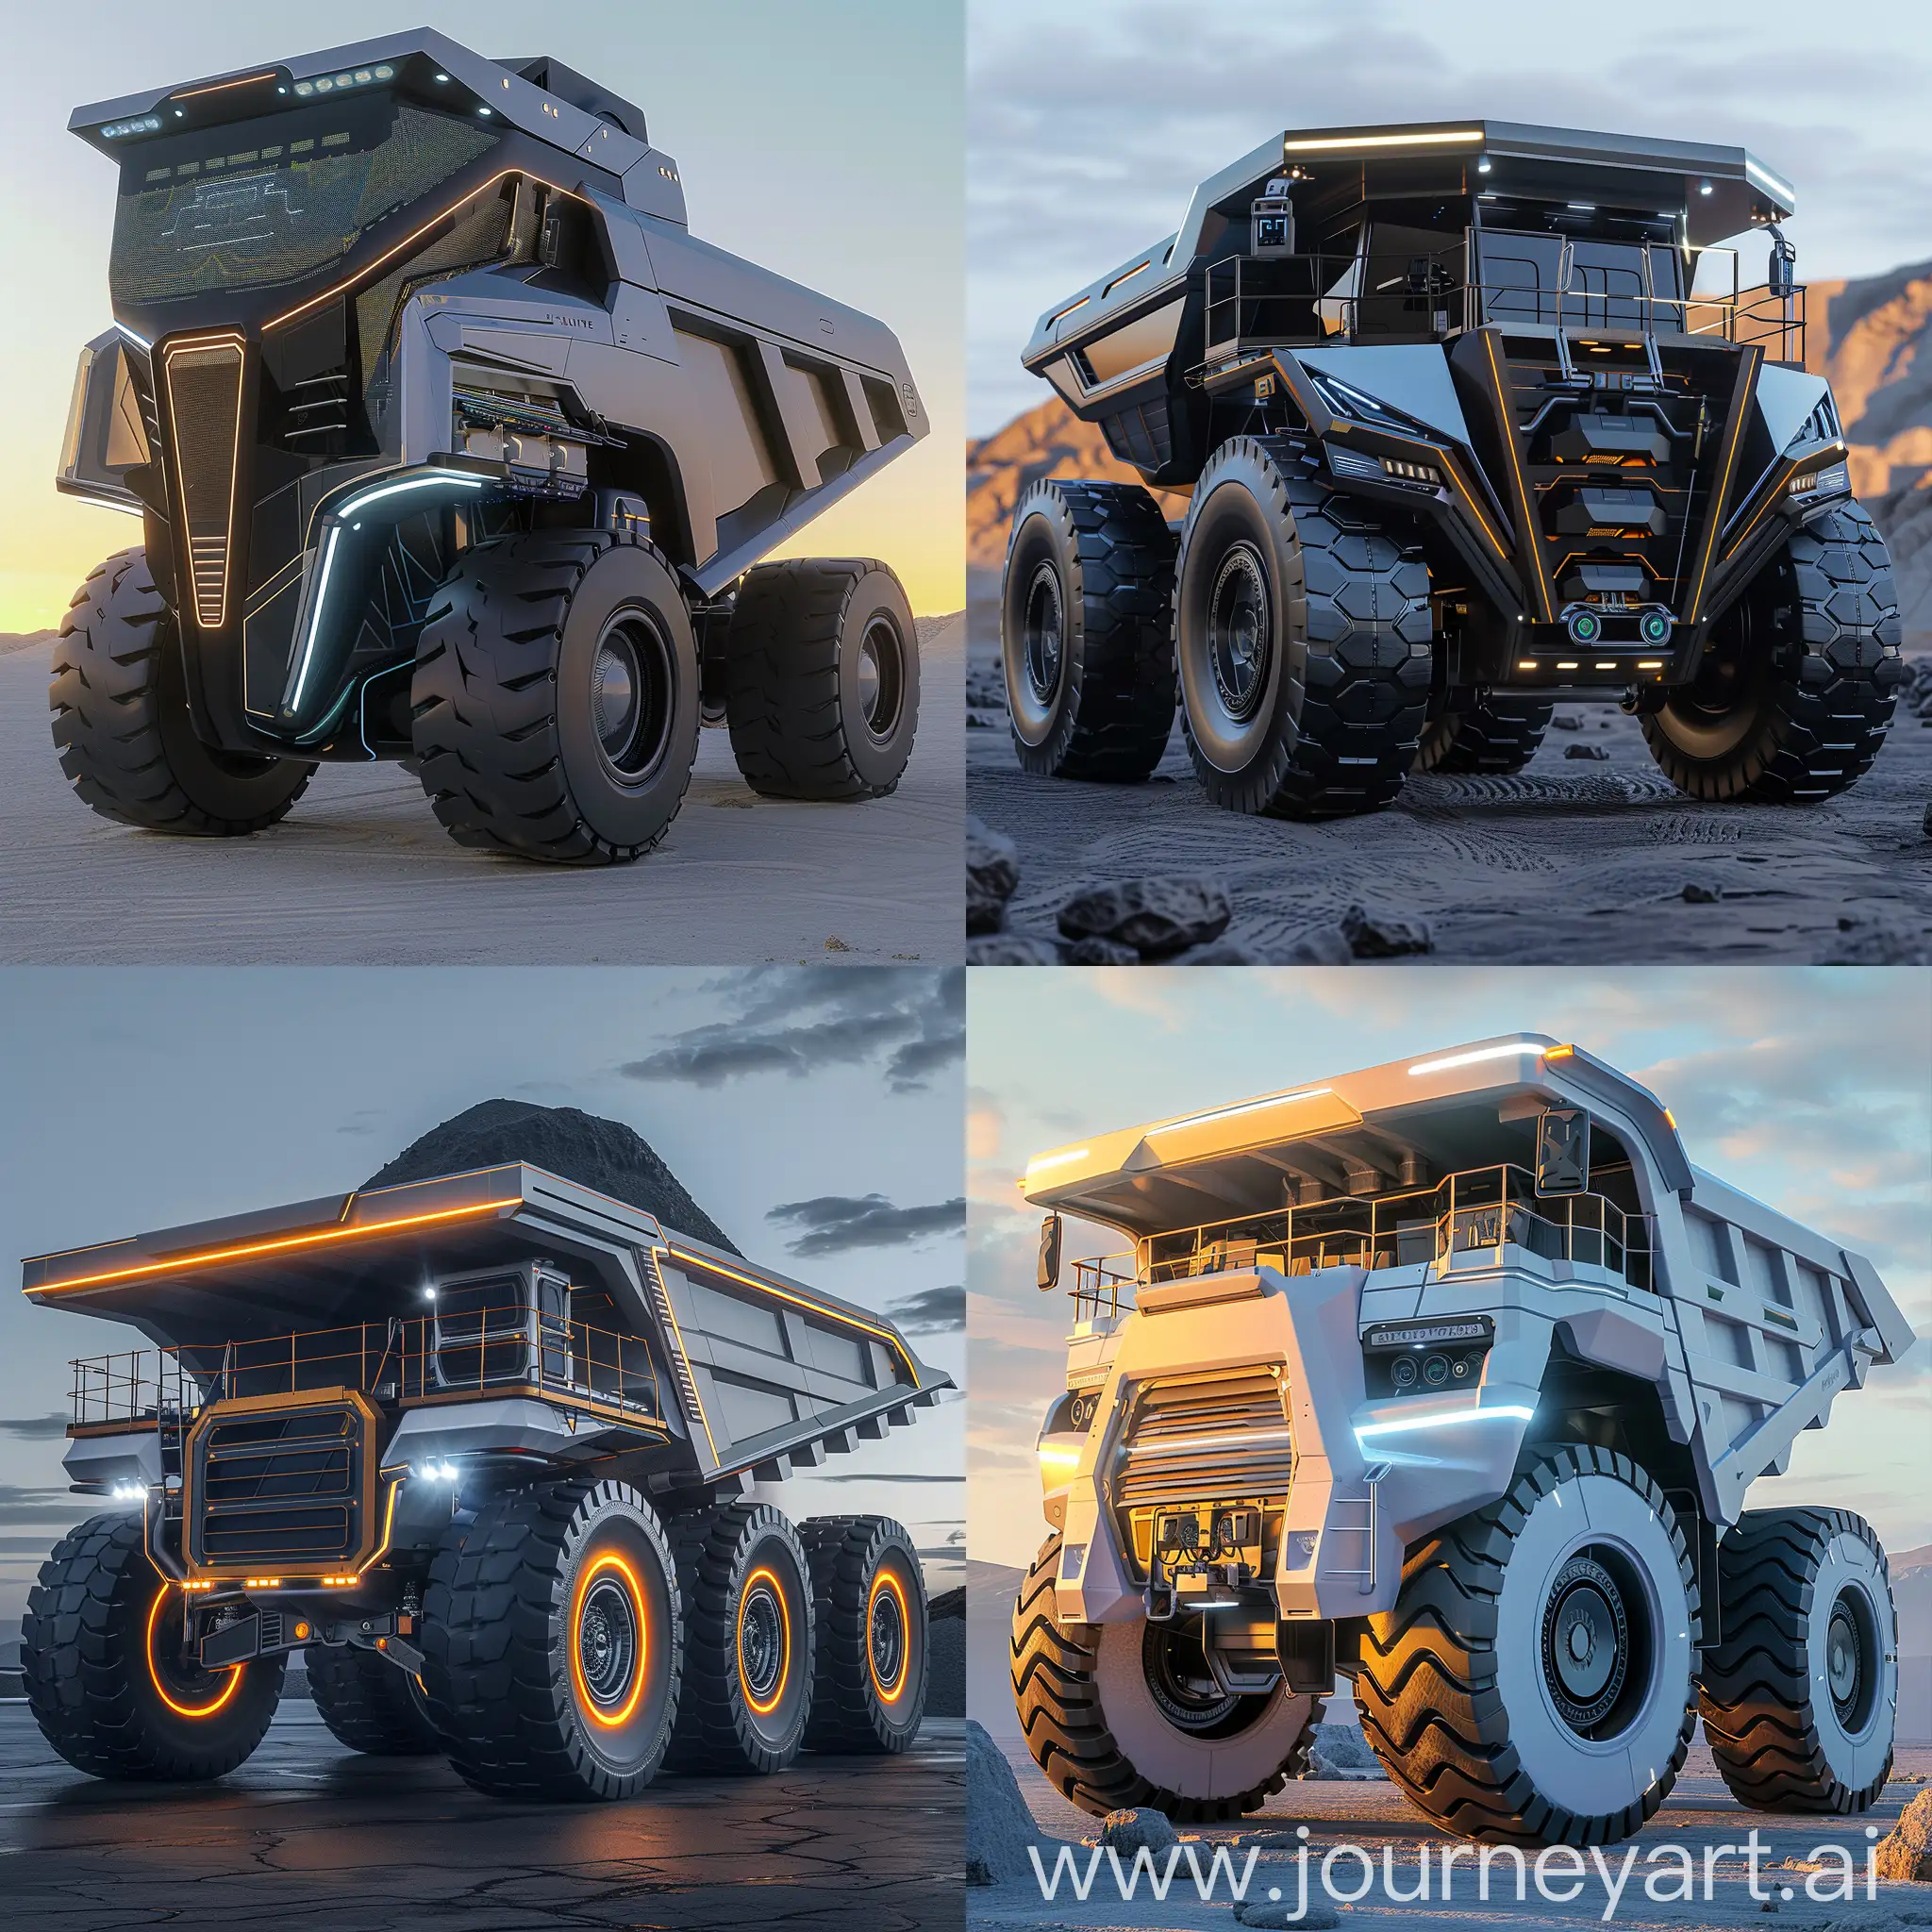 High-tech futuristic dump truck, Autonomous Driving System, Advanced Sensor Technology, Electric Powertrain, Intelligent Load Management System, Integrated Communication System, Predictive Maintenance Technology, Augmented Reality Display, Energy Recovery System, Self-Healing Materials, Biometric Security System, Aerodynamic Body Design, LED Lighting System, Integrated Camera System, Solar Panel Integration, Advanced Telematics System, Retractable Steps and Handrails, Customizable Exterior Panels, Robust Tire Design, Integrated Wind Deflector, Automated Loading and Unloading System, unreal engine 5 --stylize 1000